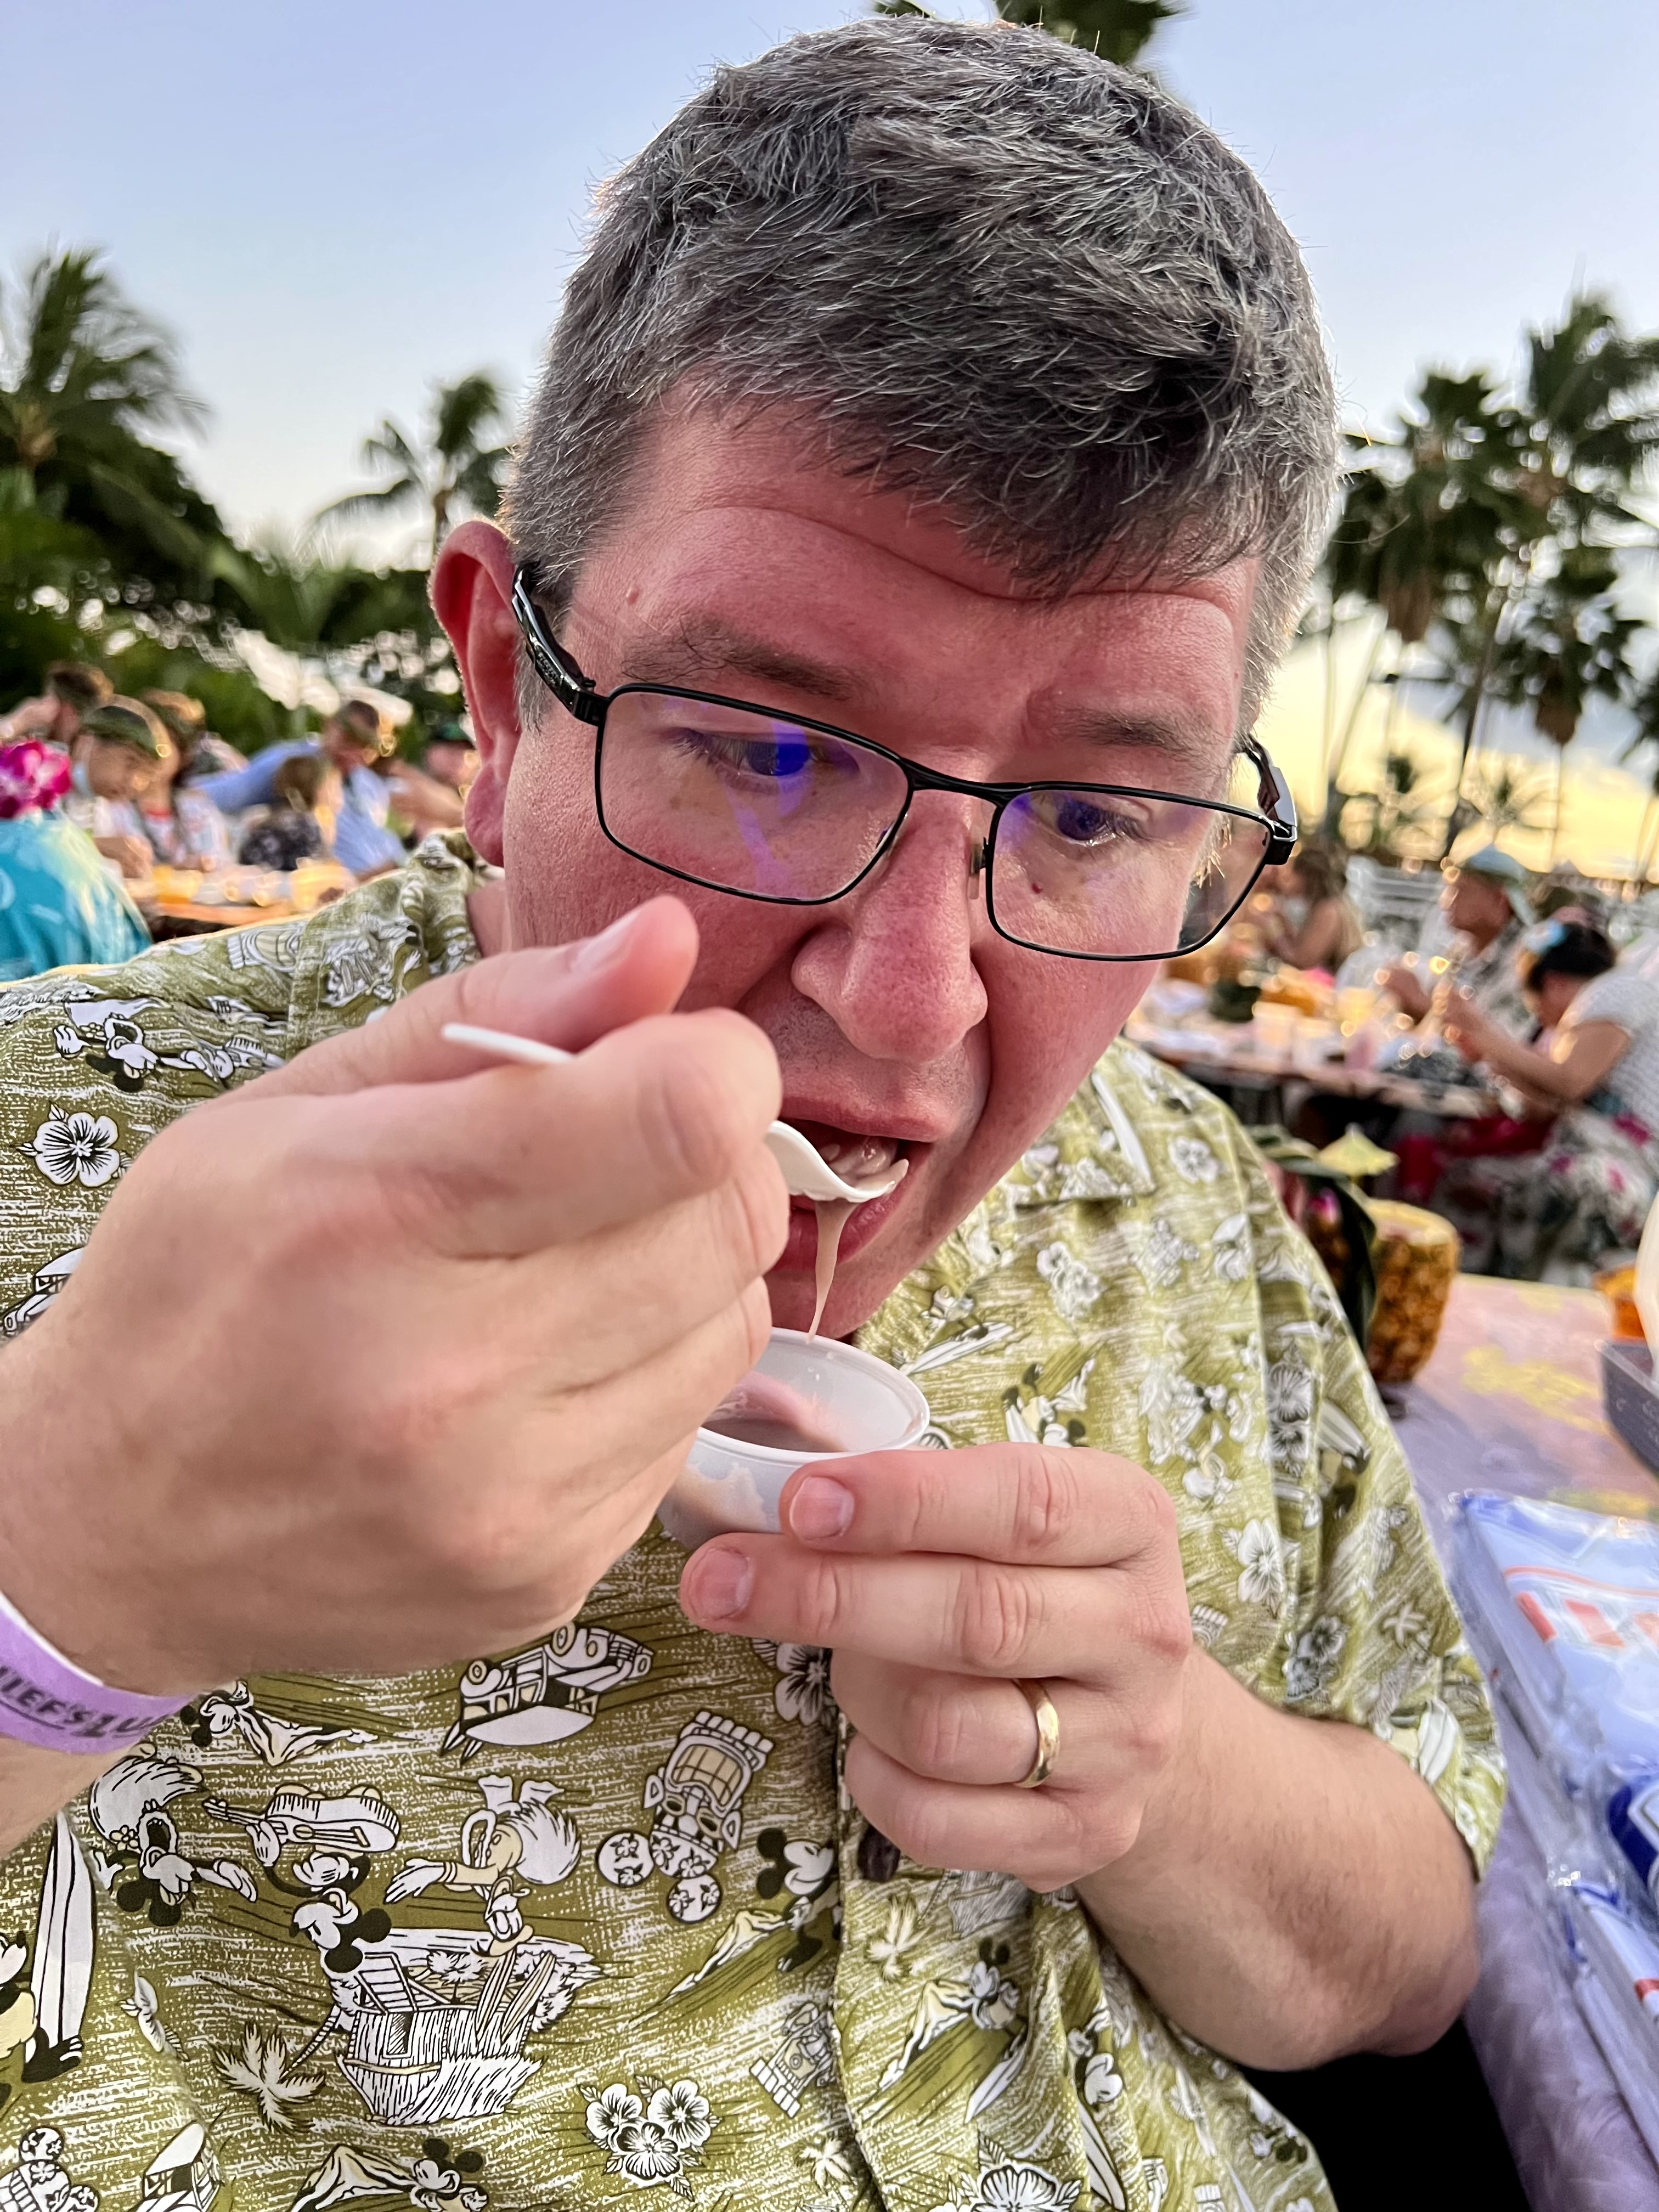 a man eating from a spoon